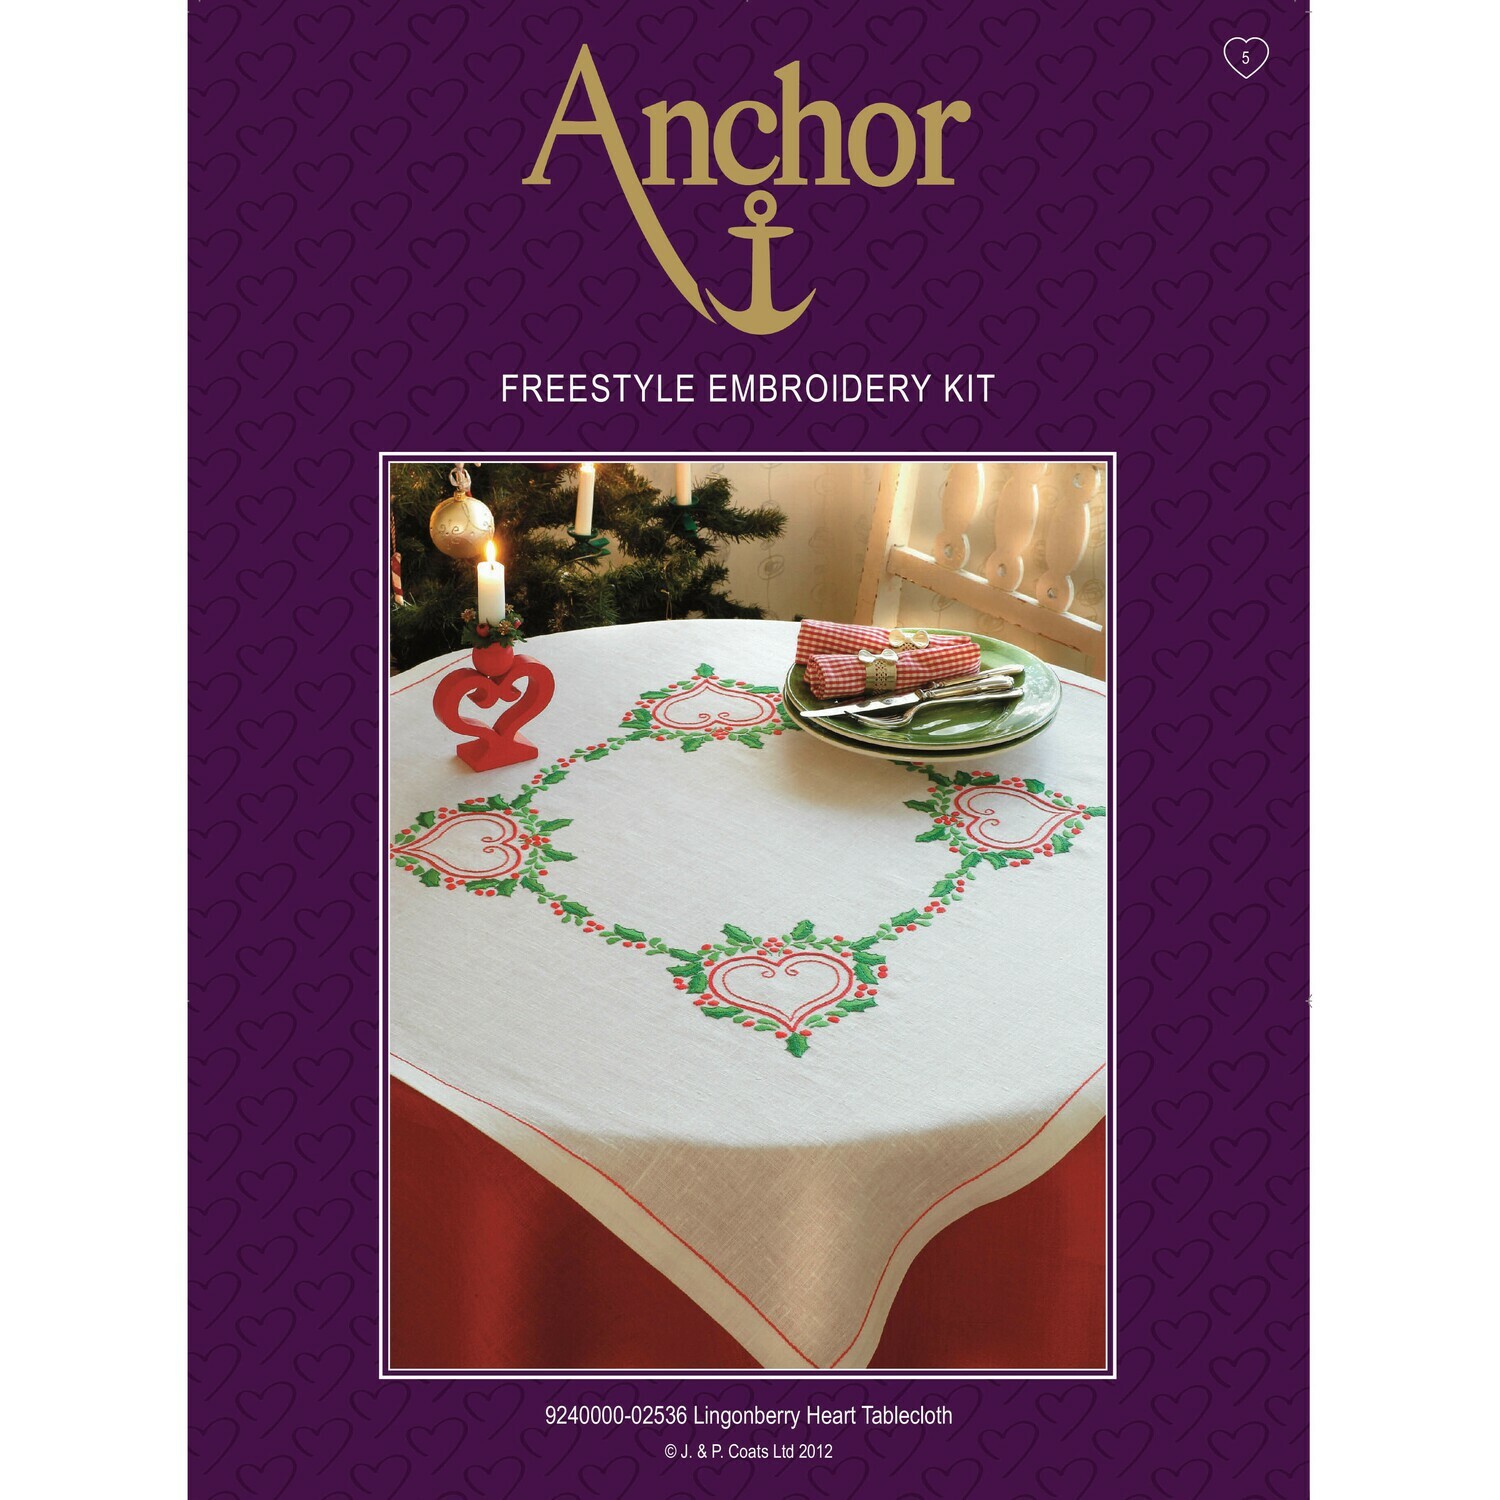 Anchor Freestyle Kit - Lingonberry Tablecloth